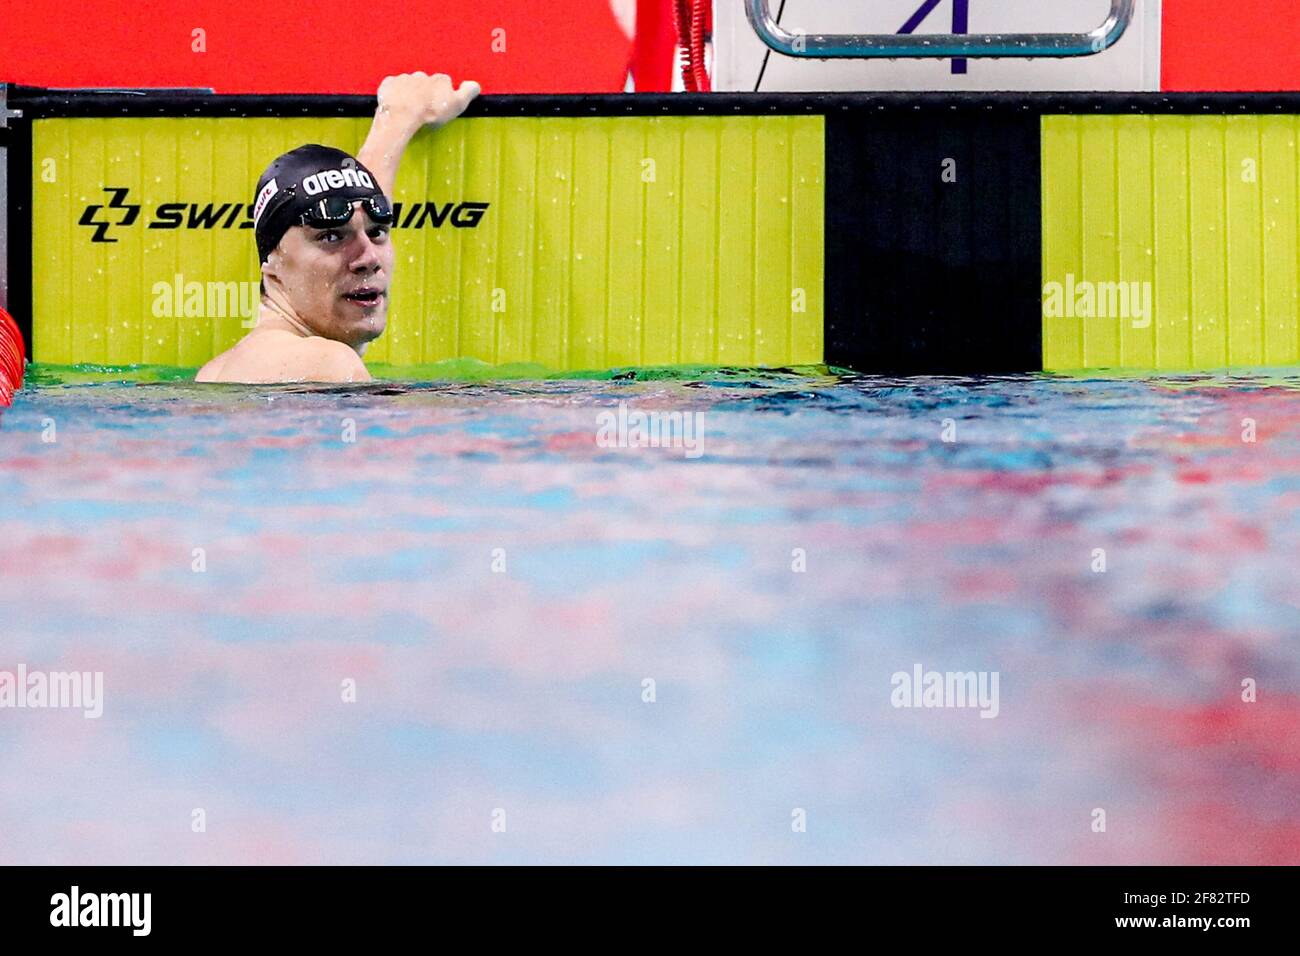 EINDHOVEN, NETHERLANDS - APRIL 11: Maximilian Pilger competing in the Men 200m Breaststroke during the Eindhoven Qualification Meet at Pieter van den Stock Photo